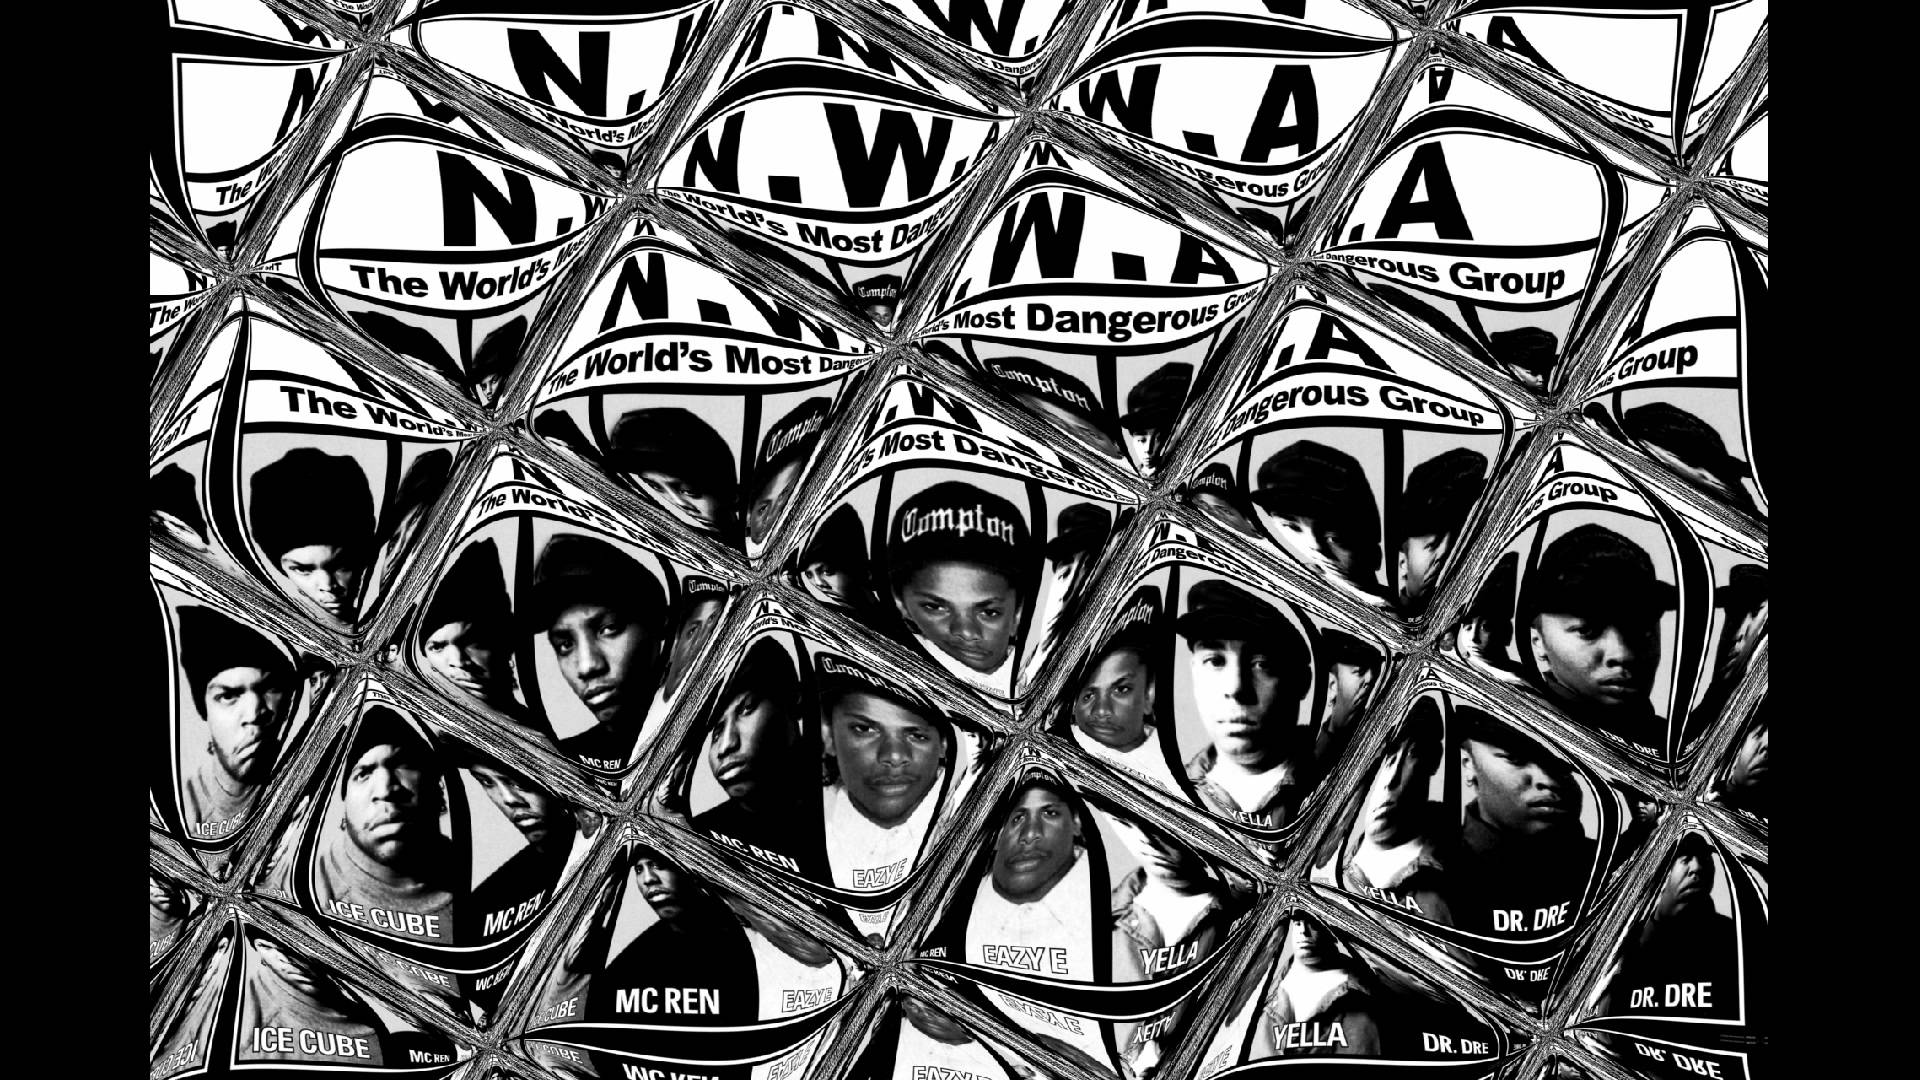 Image For > Nwa Album Cover